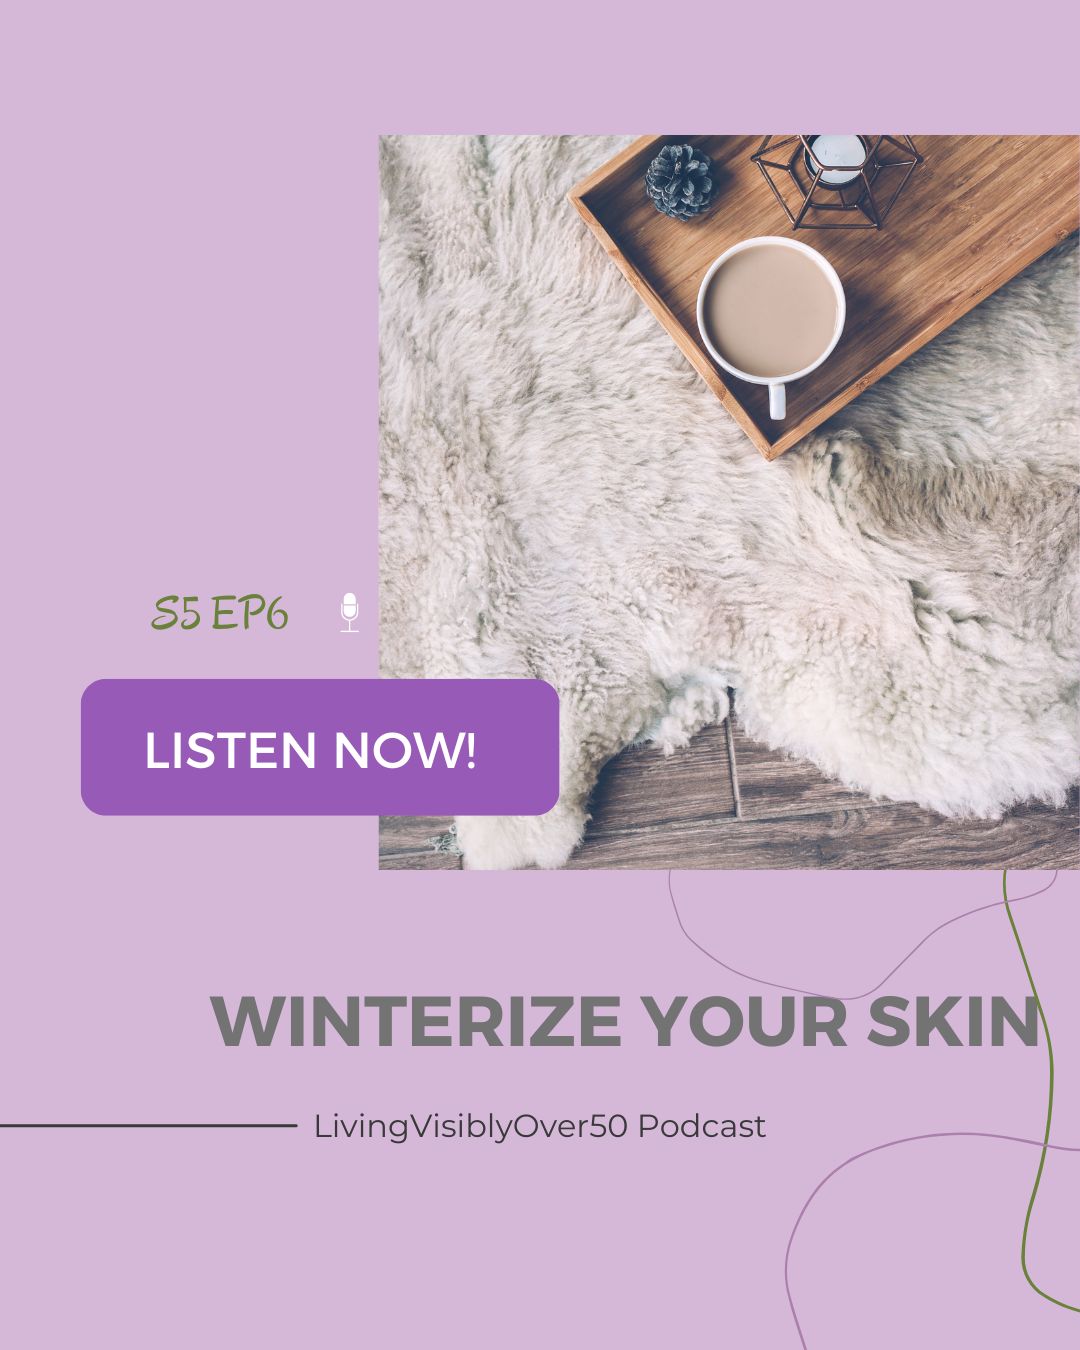 Living Visibly Over 50 Podcast Winter Skin